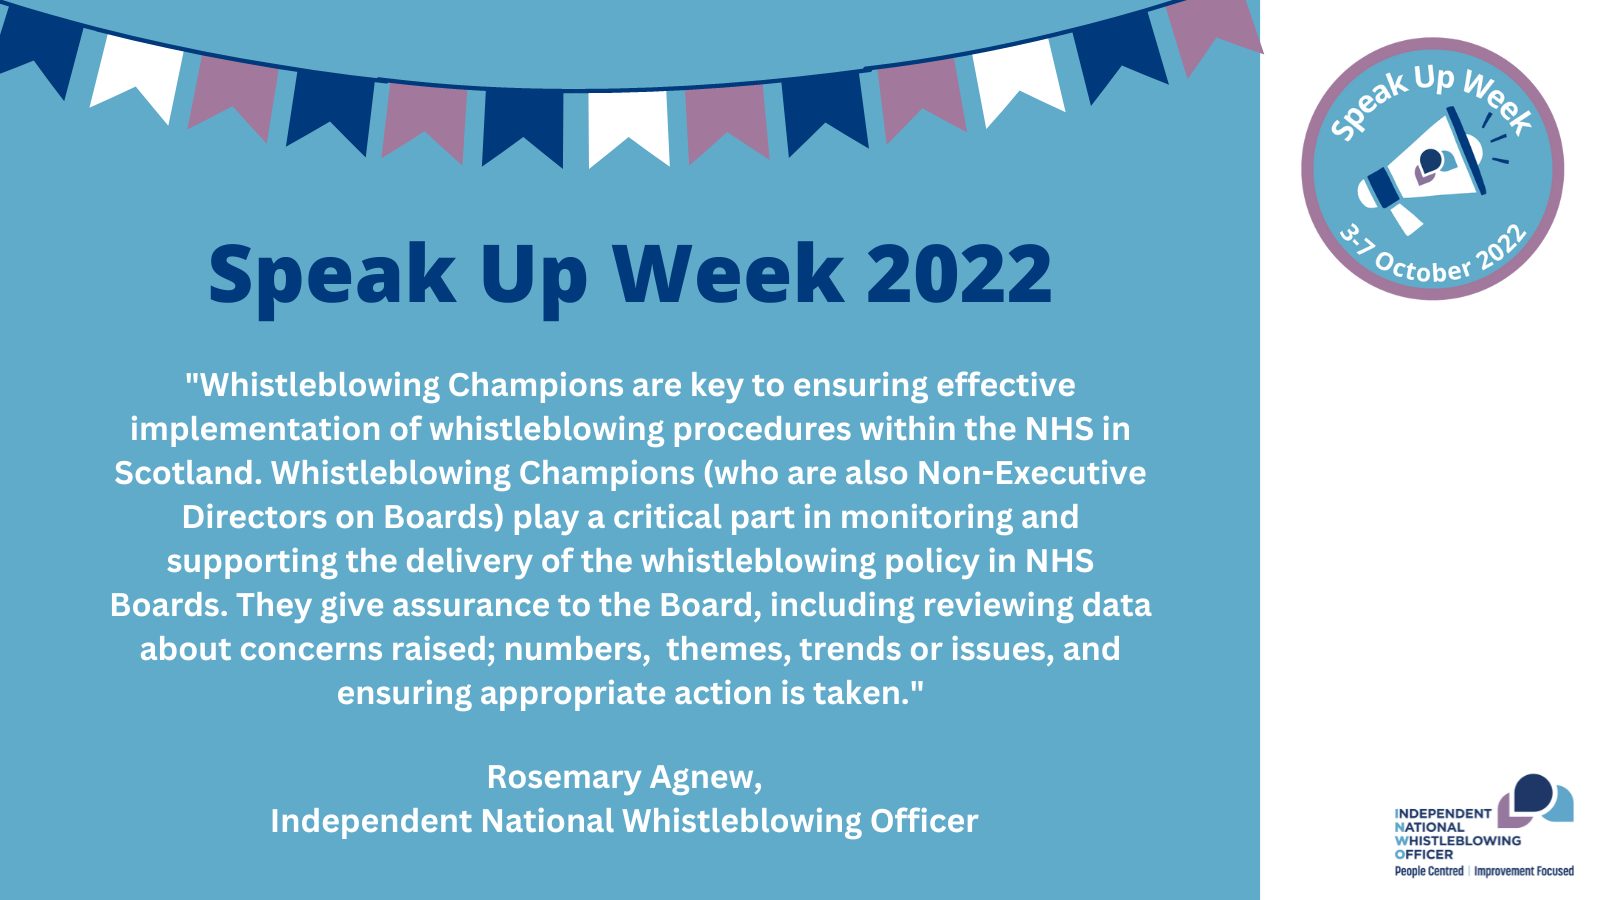 Quote from the INWO, Rosemary Agnew: "Whistleblowing Champions are key to ensuring effective implementation of whistleblowing procedures within the NHS in Scotland. Whistleblowing Champions (who are also Non-Executive Directors on Boards) play a critical part in monitoring and supporting the delivery of the whistleblowing policy in NHS Boards. They give assurance to the Board, including reviewing data about concerns raised; numbers,  themes, trends or issues, and ensuring appropriate action is taken."